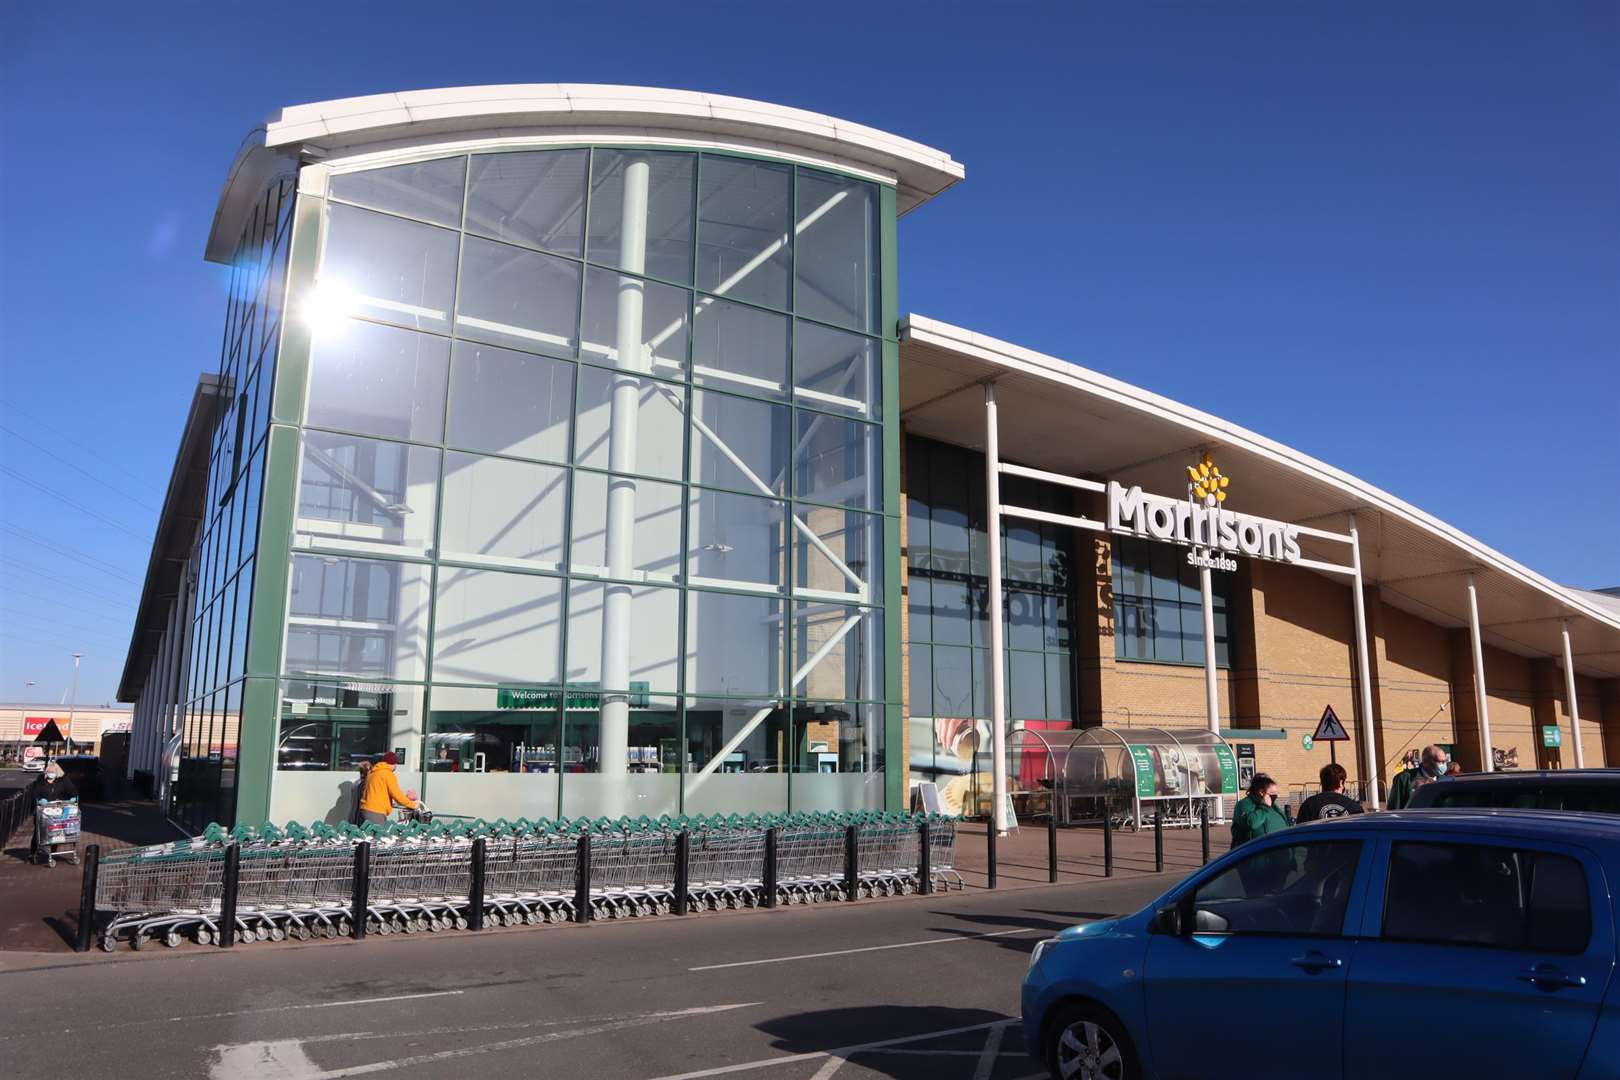 The Morrisons store at the retail park